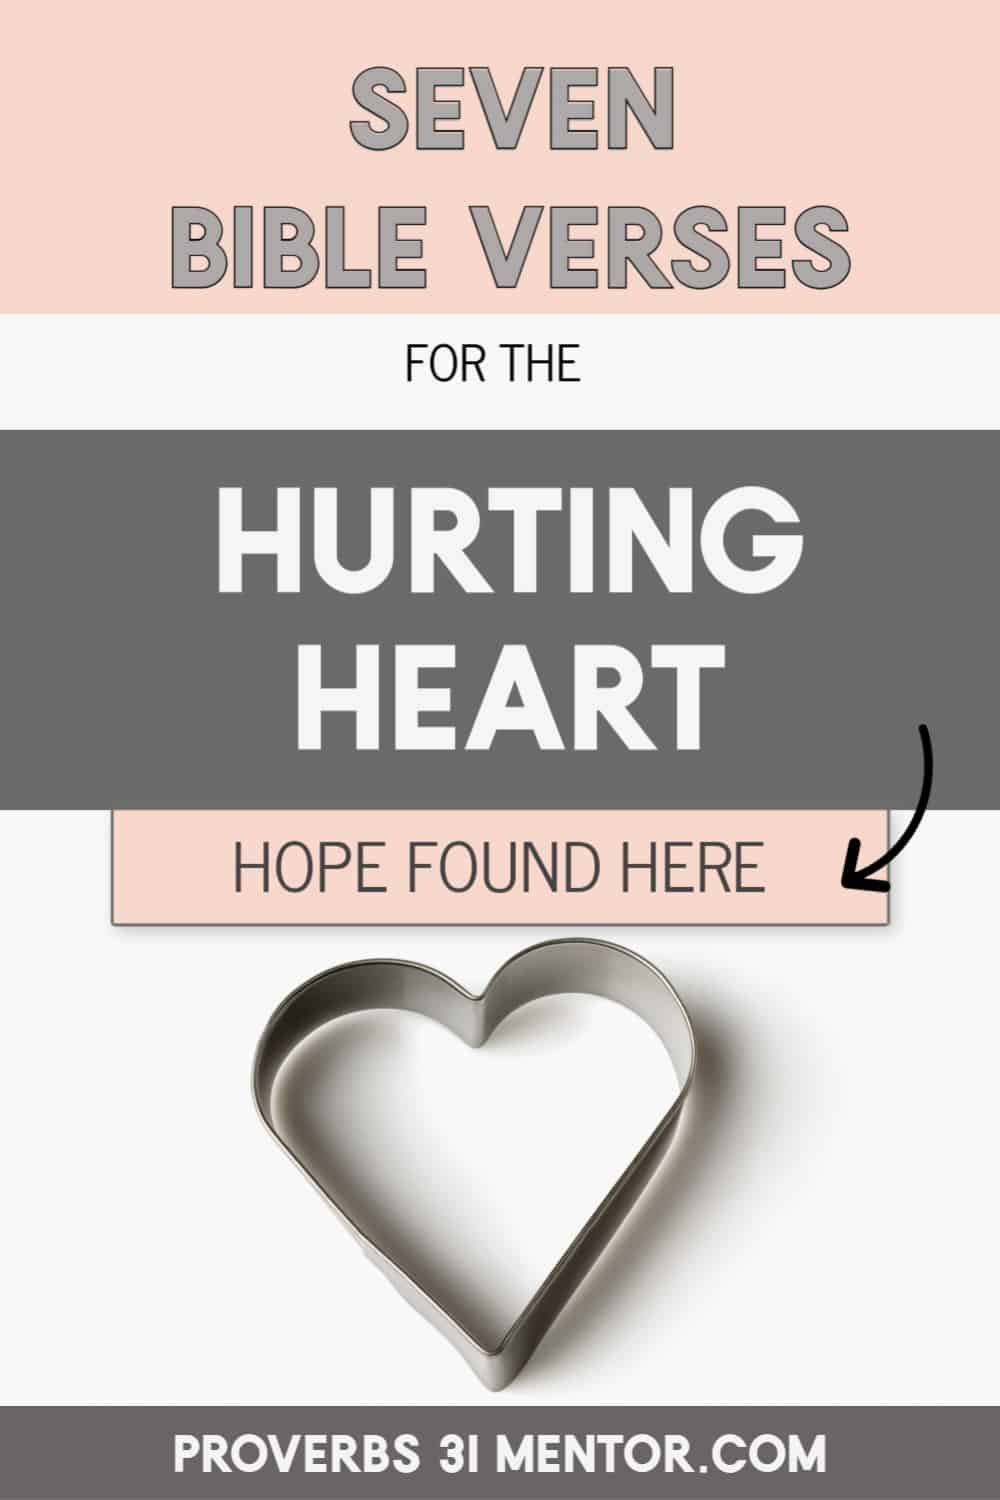 Title- 7 Bible verses for the hurting heart Picture- a metal heart on a white background